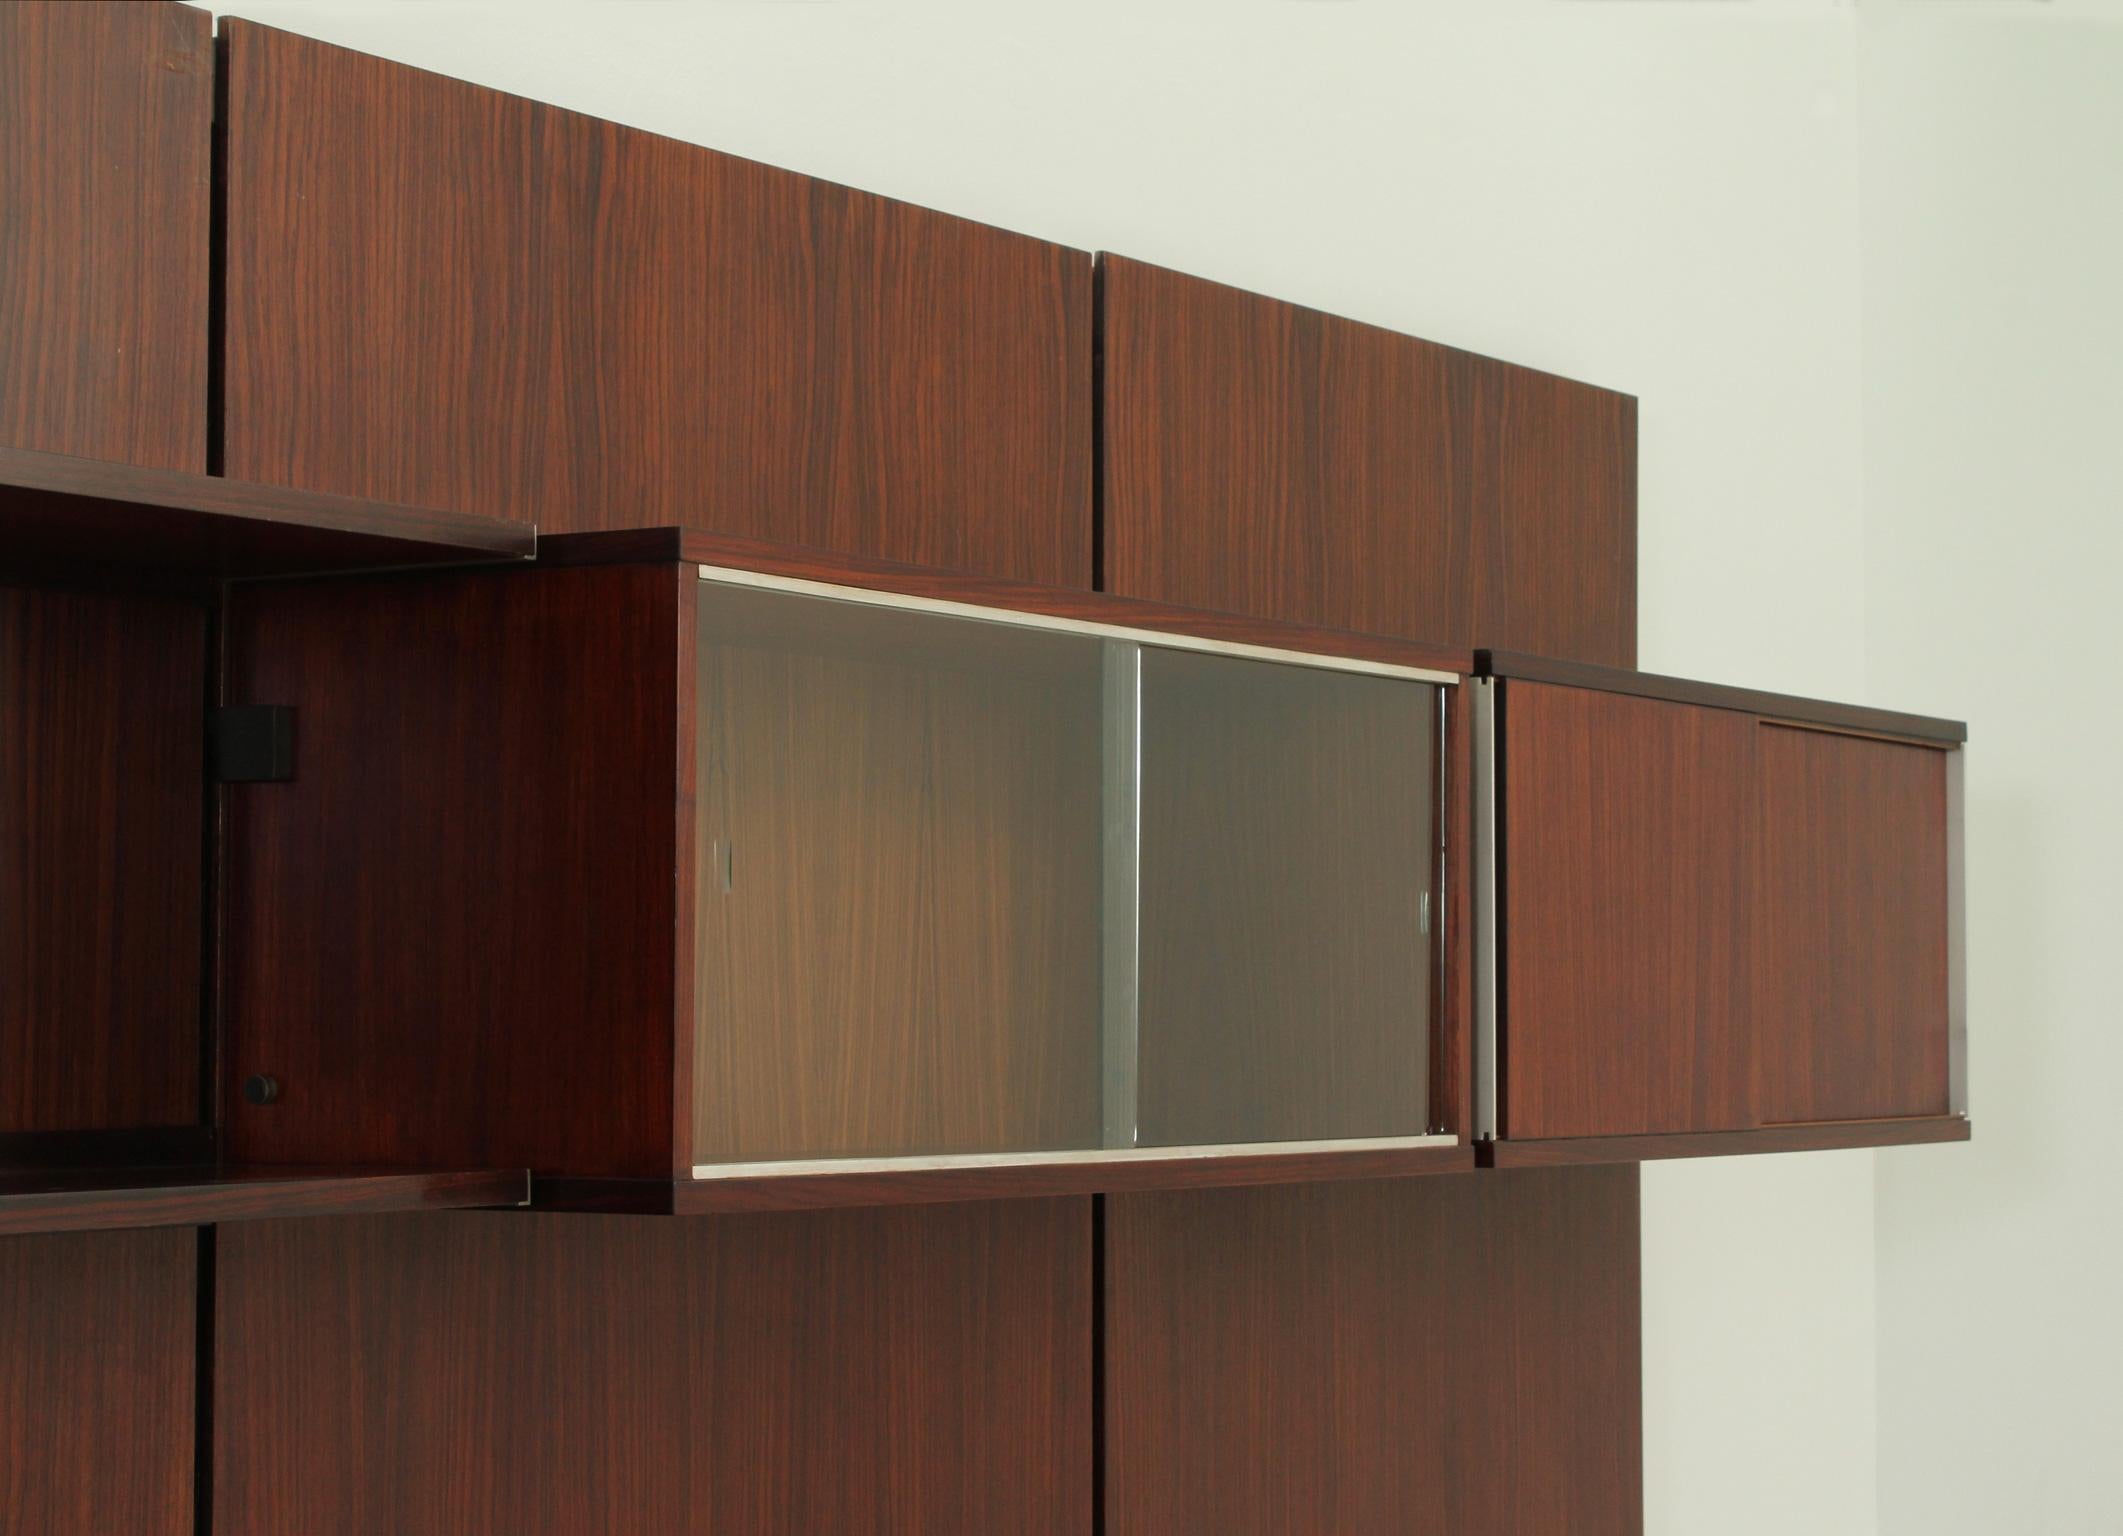 Mid-20th Century Urio Wall System by Ico Parisi for Mim Roma, Italy, 1957 For Sale